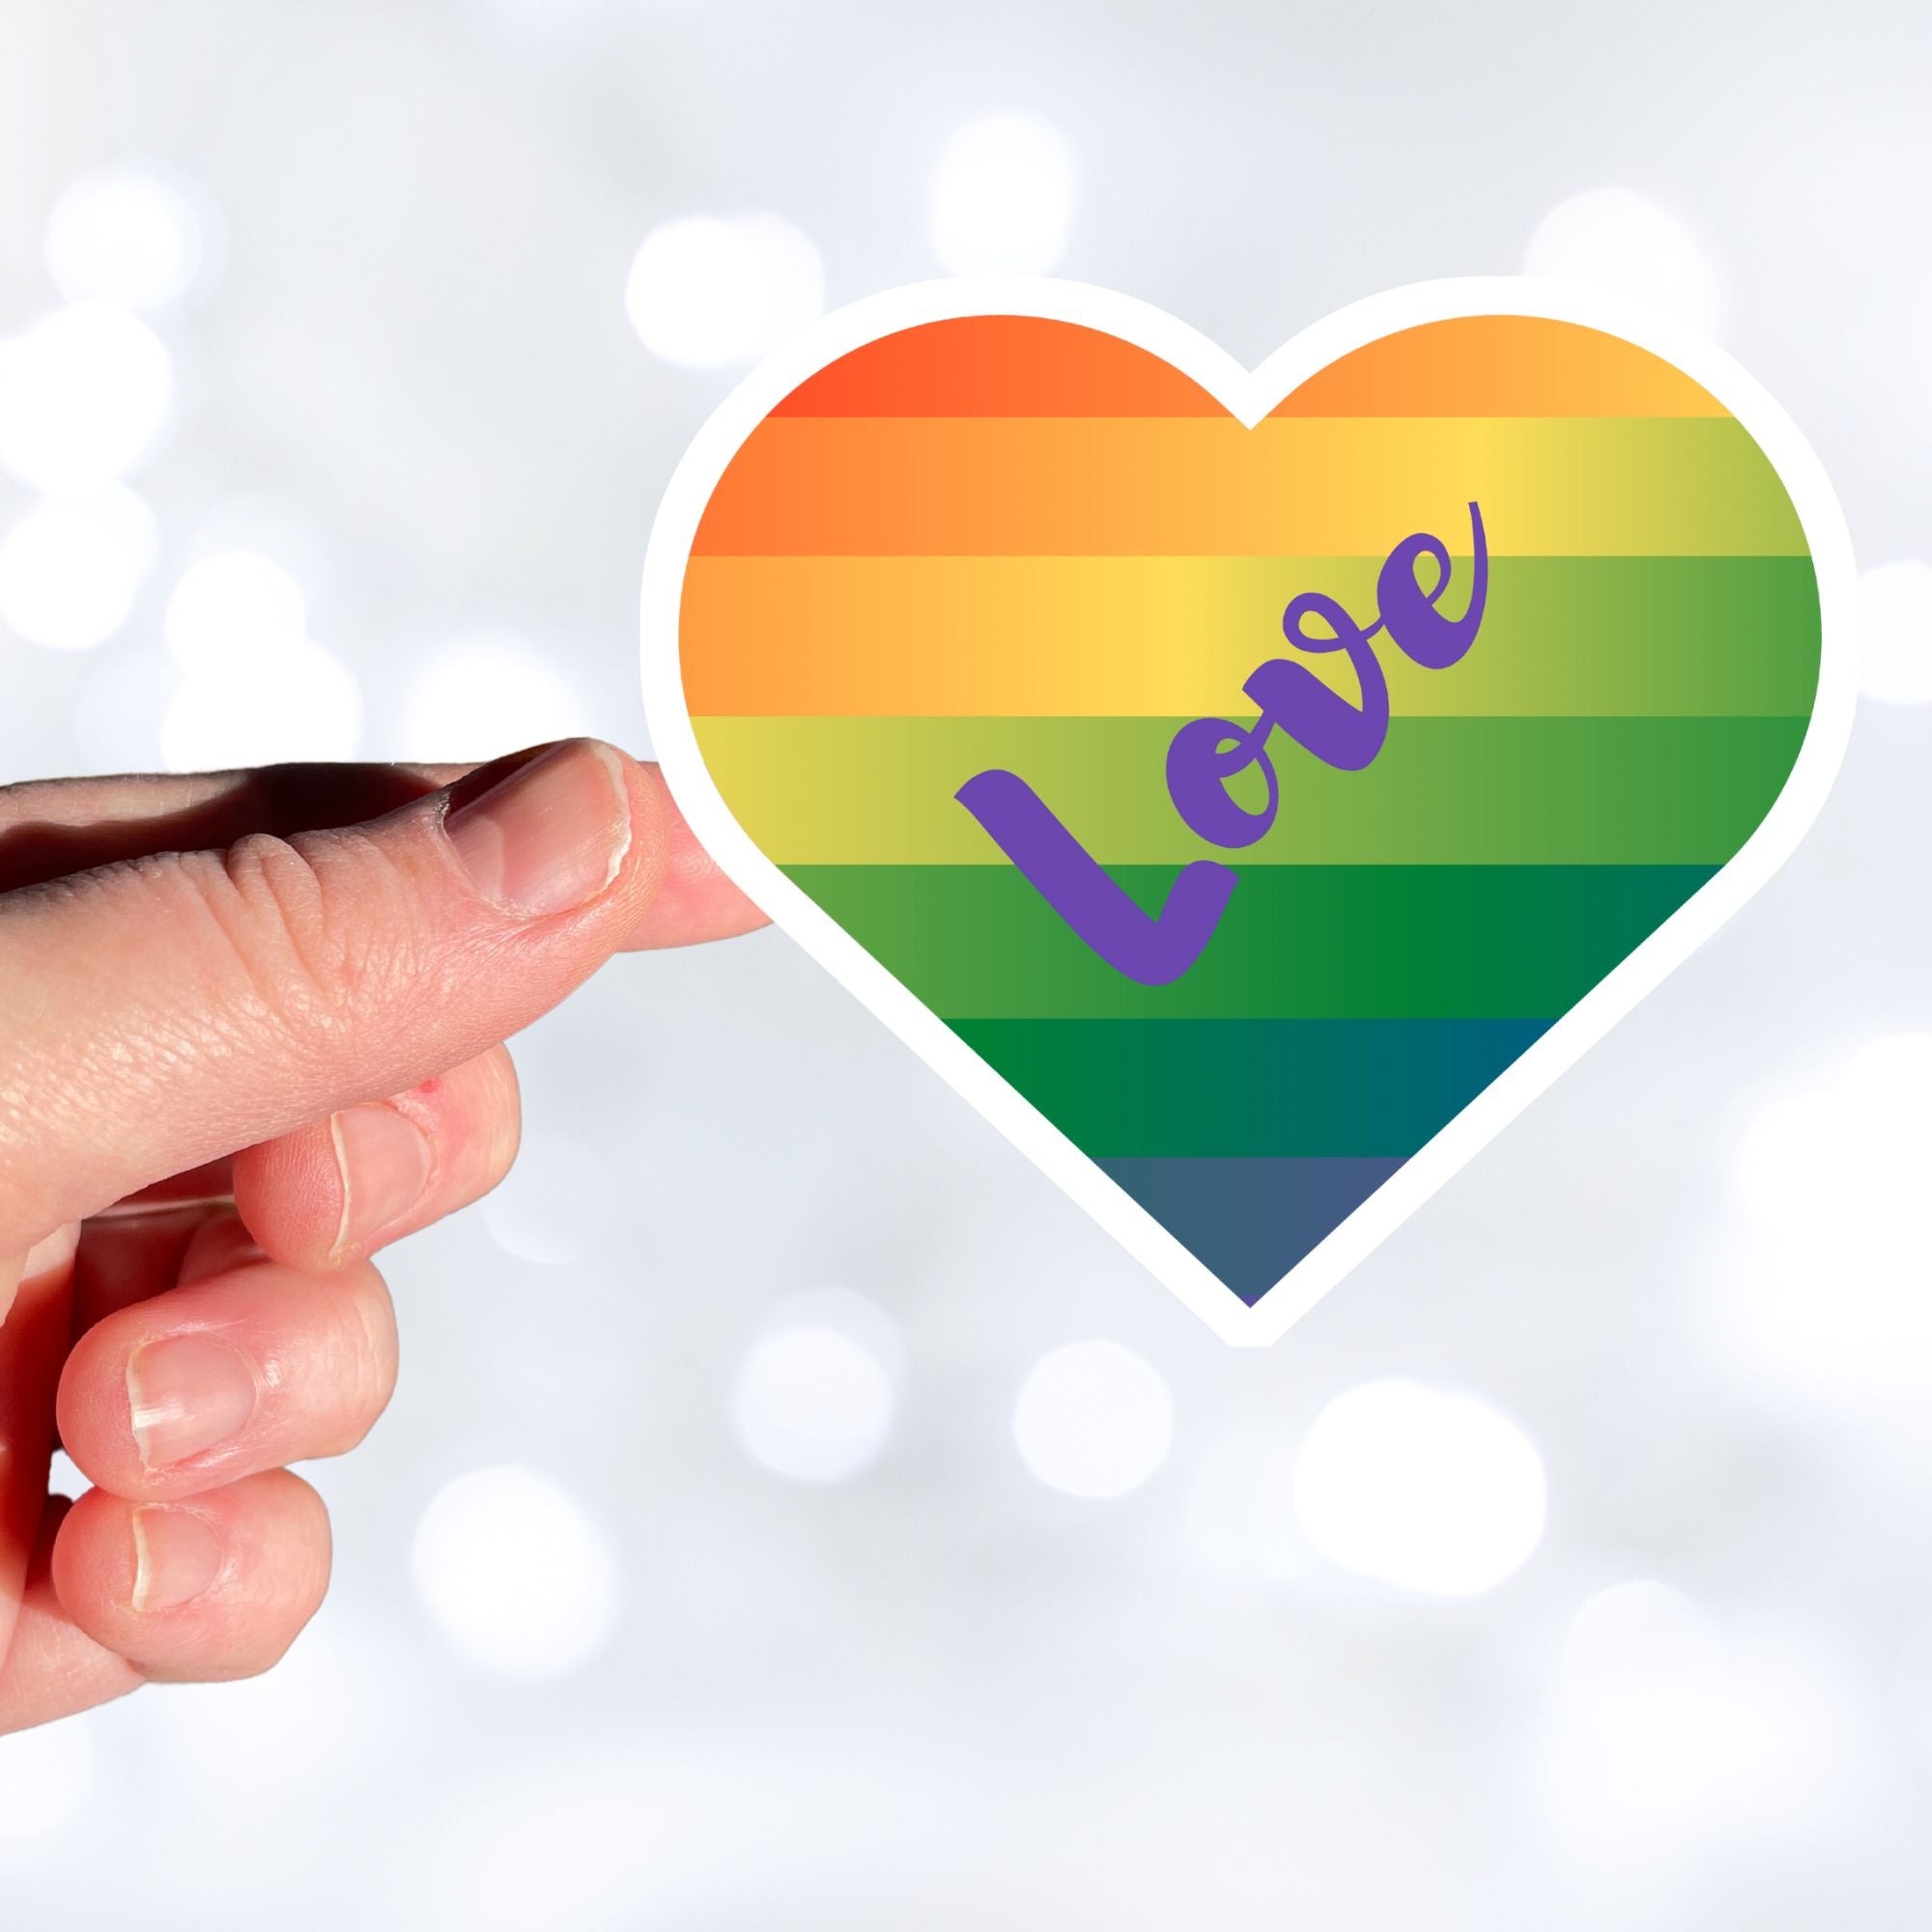 This individual die-cut sticker features a heart shape with graduated colors from orange at the top to blue at the bottom, and the word love written across. Perfect for the people you love! This image shows a hand holding the Love Heart sticker.